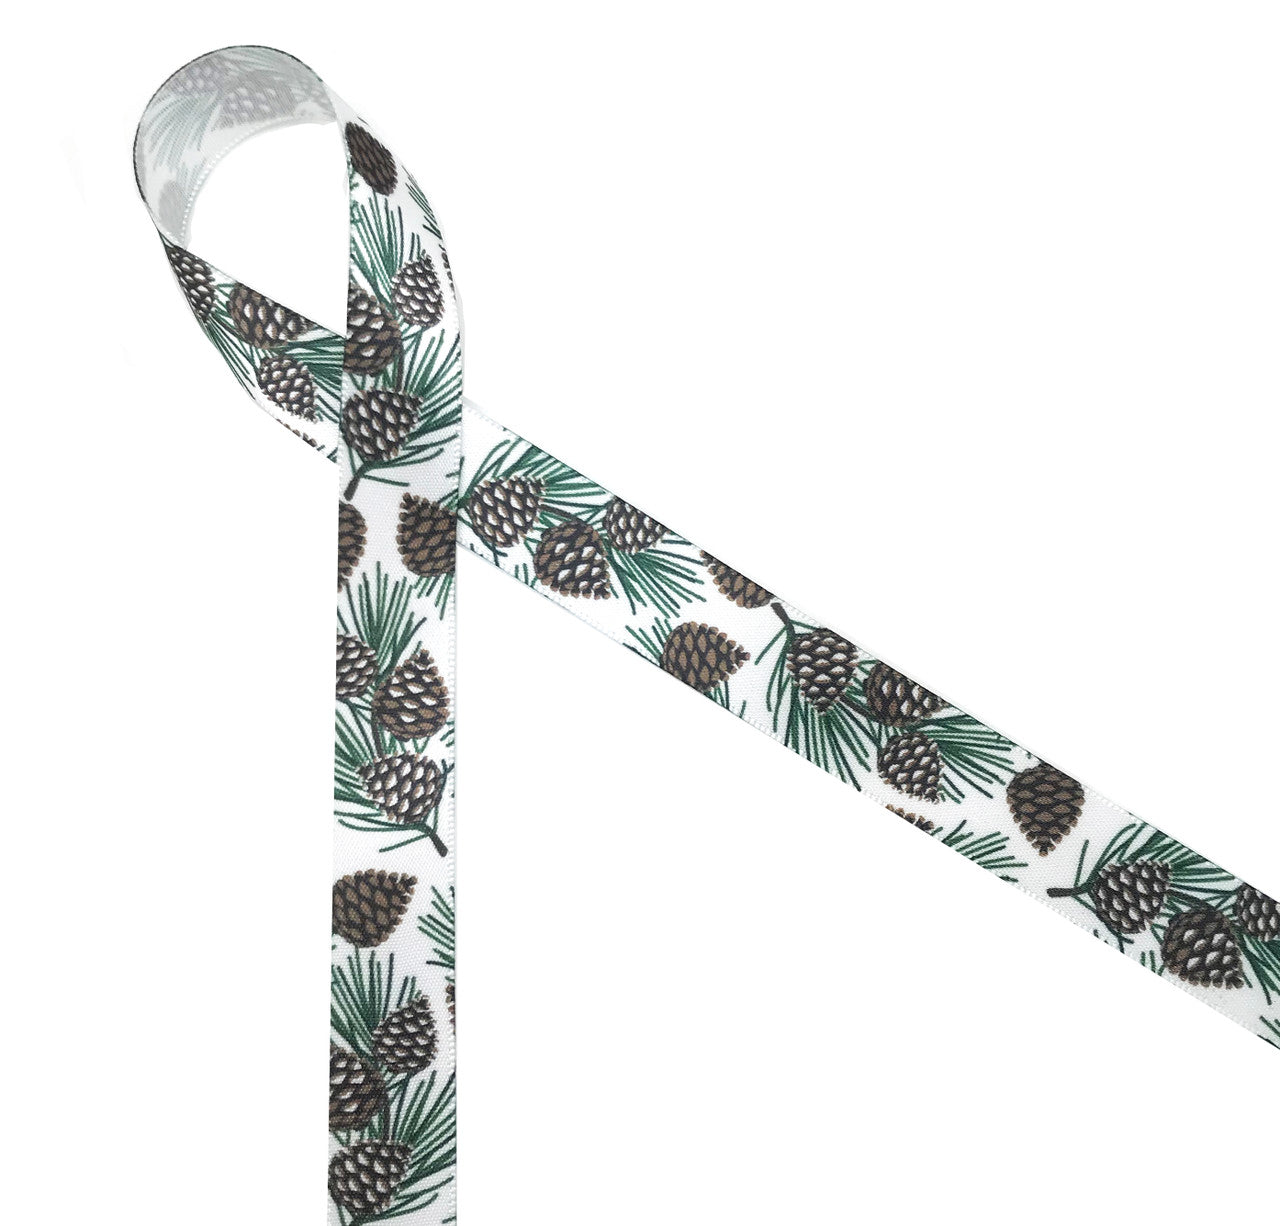 Pine cones, needles and branches on a white background printed on 5/8" white single face satin ribbon is the perfect ribbon for gifts, decor, woodland themed parties, favors , cookies and cake pops all Winter long. This ribbon is a perfect addition to any Woodland themed craft or sewing project too! All our ribbon is designed and printed in the USA